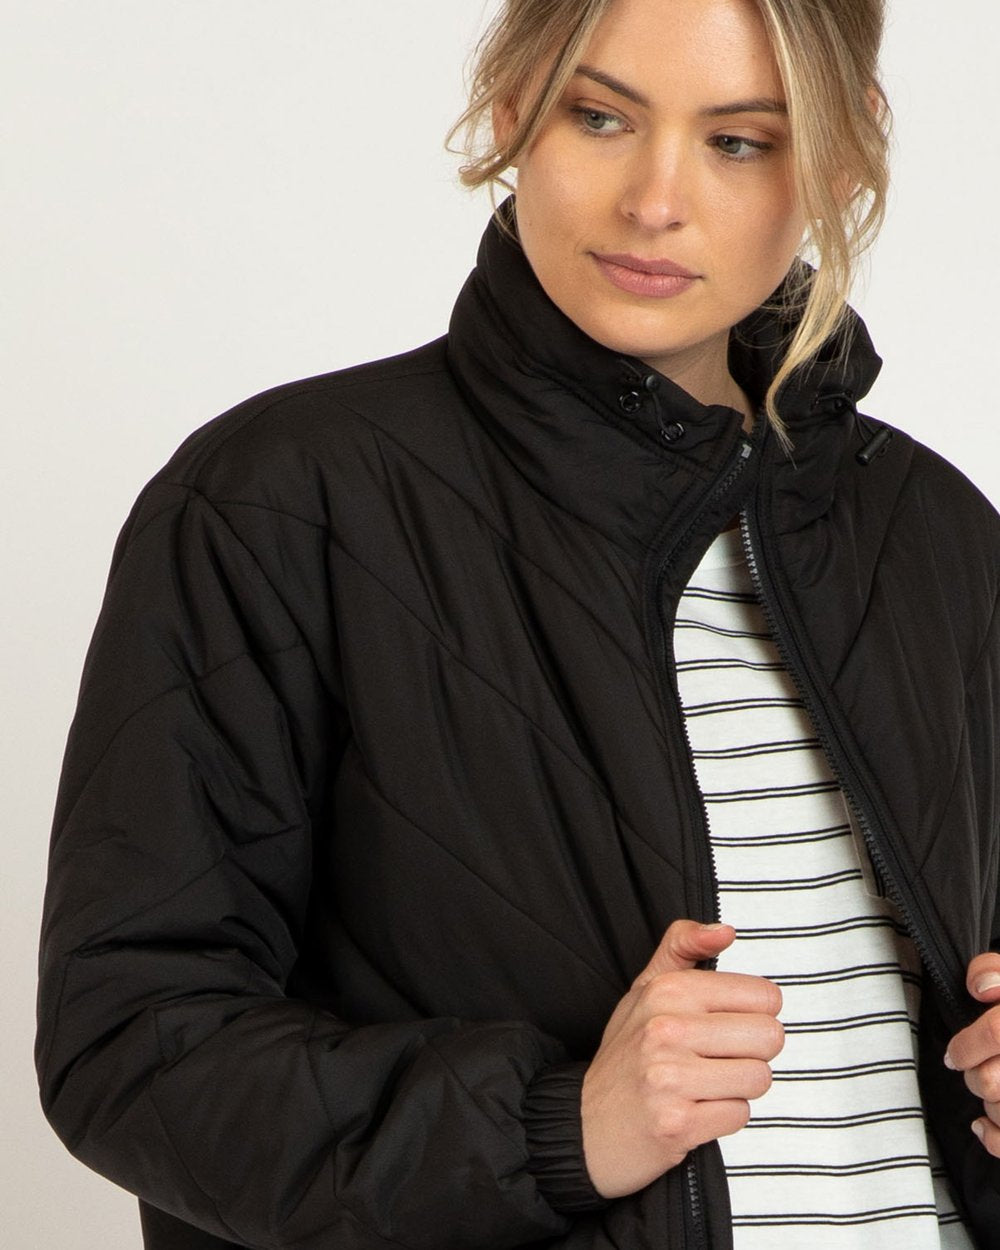 Rylie Puffer Jacket